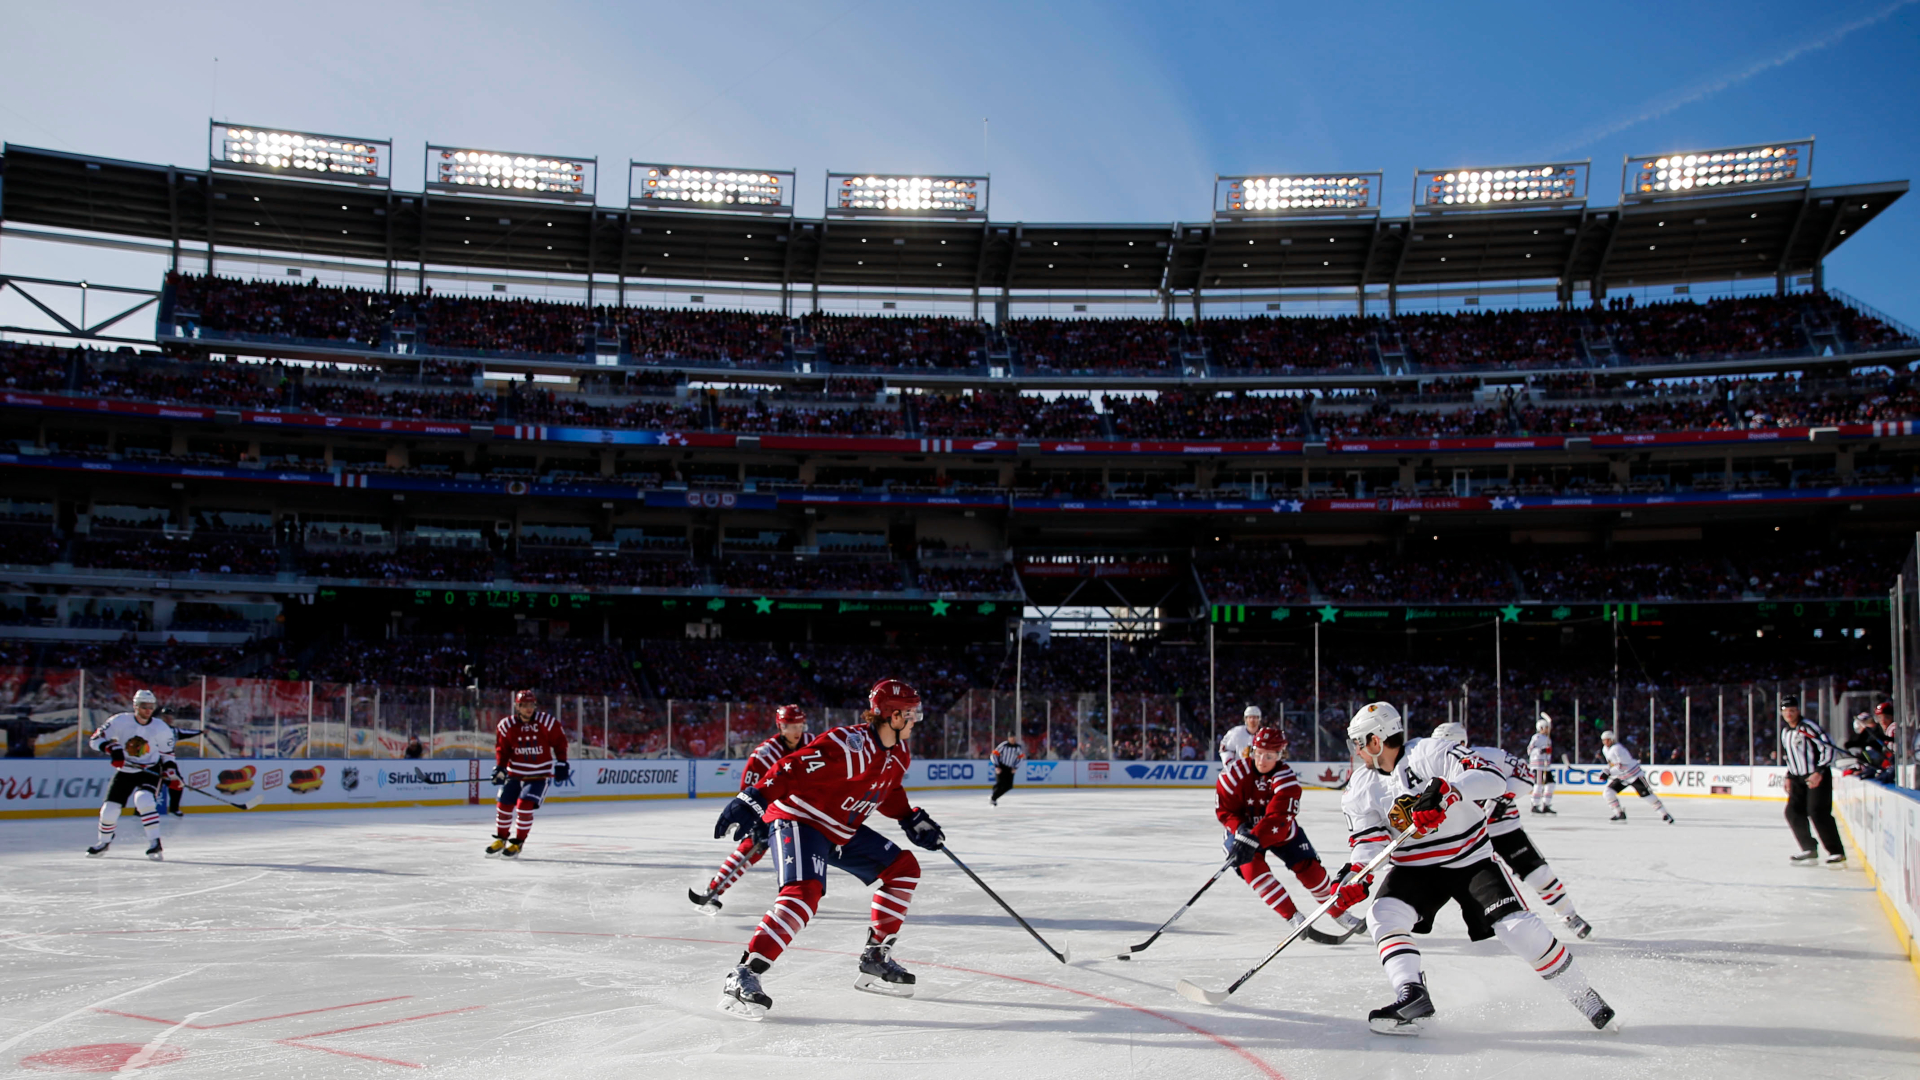 Nicklas Backstrom carries the puck during the 2015 Winter Classic at Nationals Park